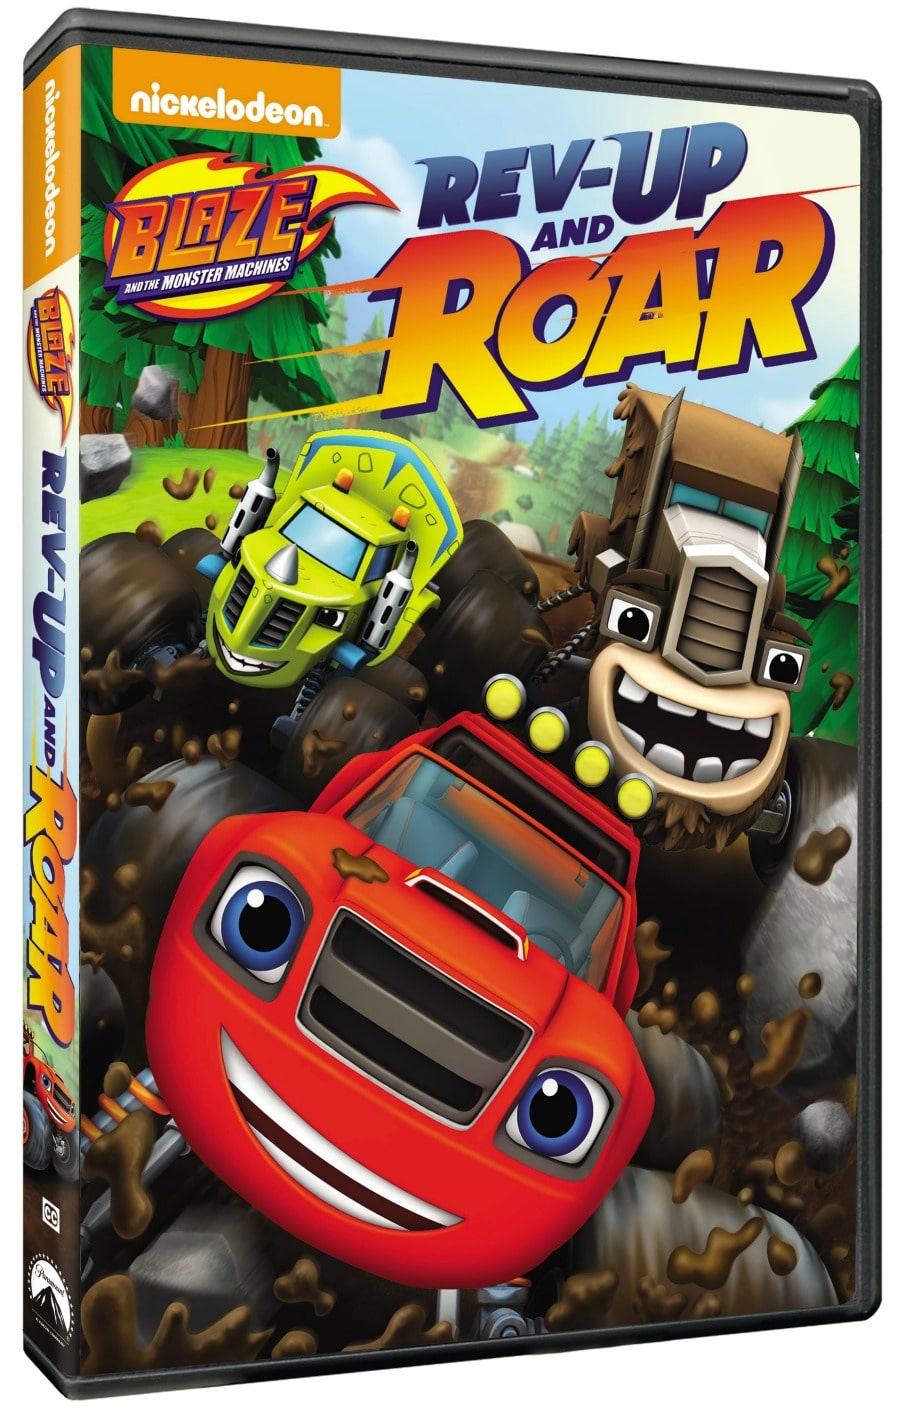 Blaze and the Monster Machines: Rev Up and Roar!